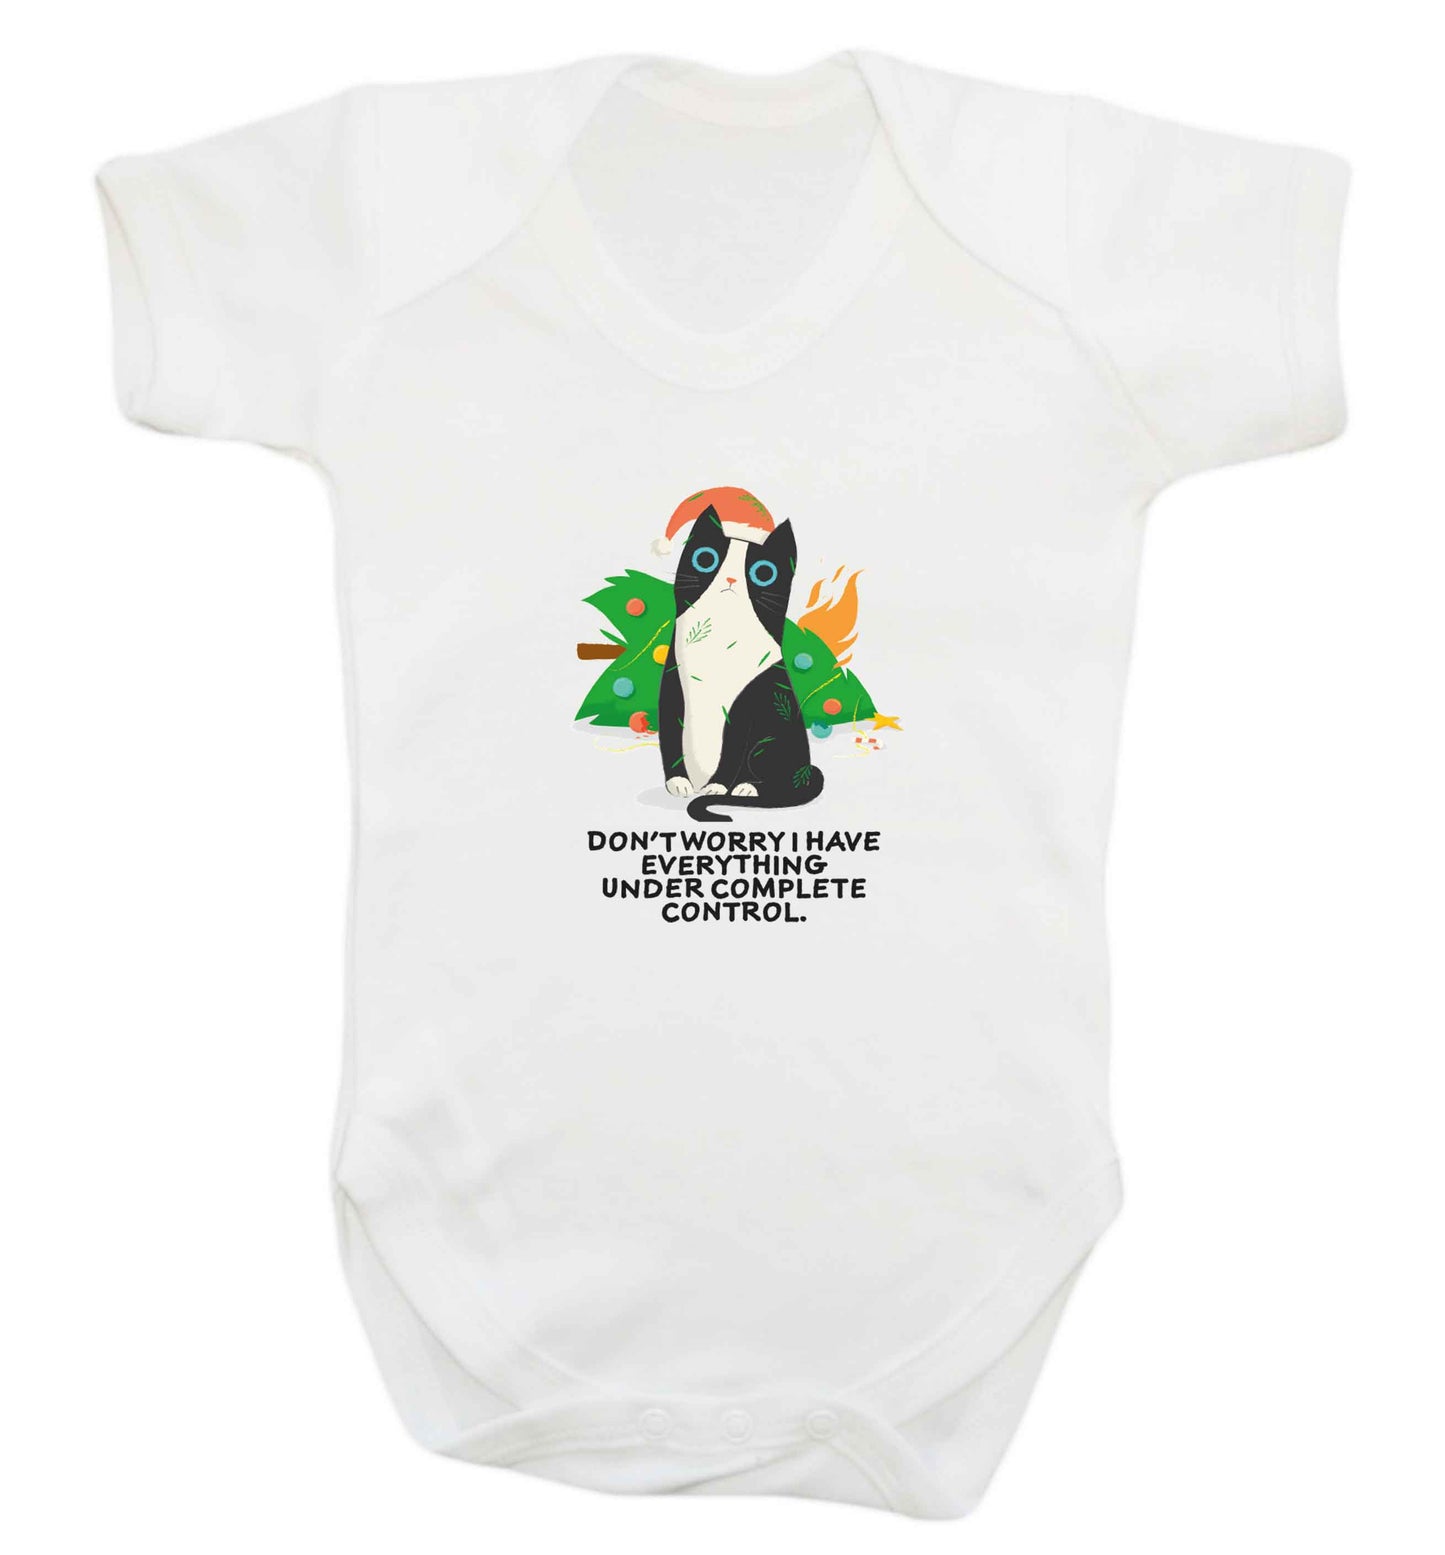 Don't worry I have everything under complete control baby vest white 18-24 months